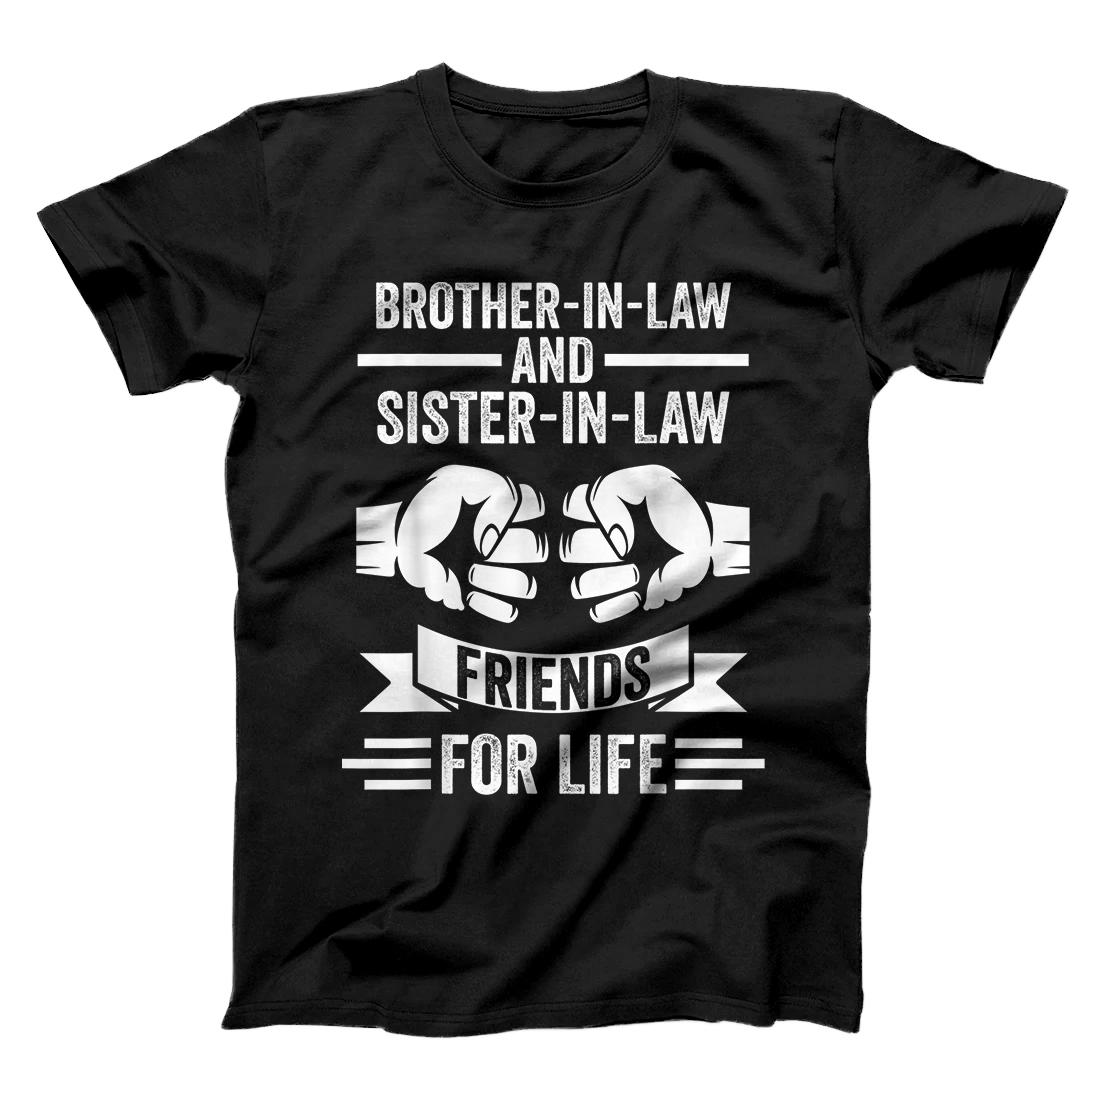 Personalized Brother-in-law & sister-in-law friends for life Gift T-Shirt